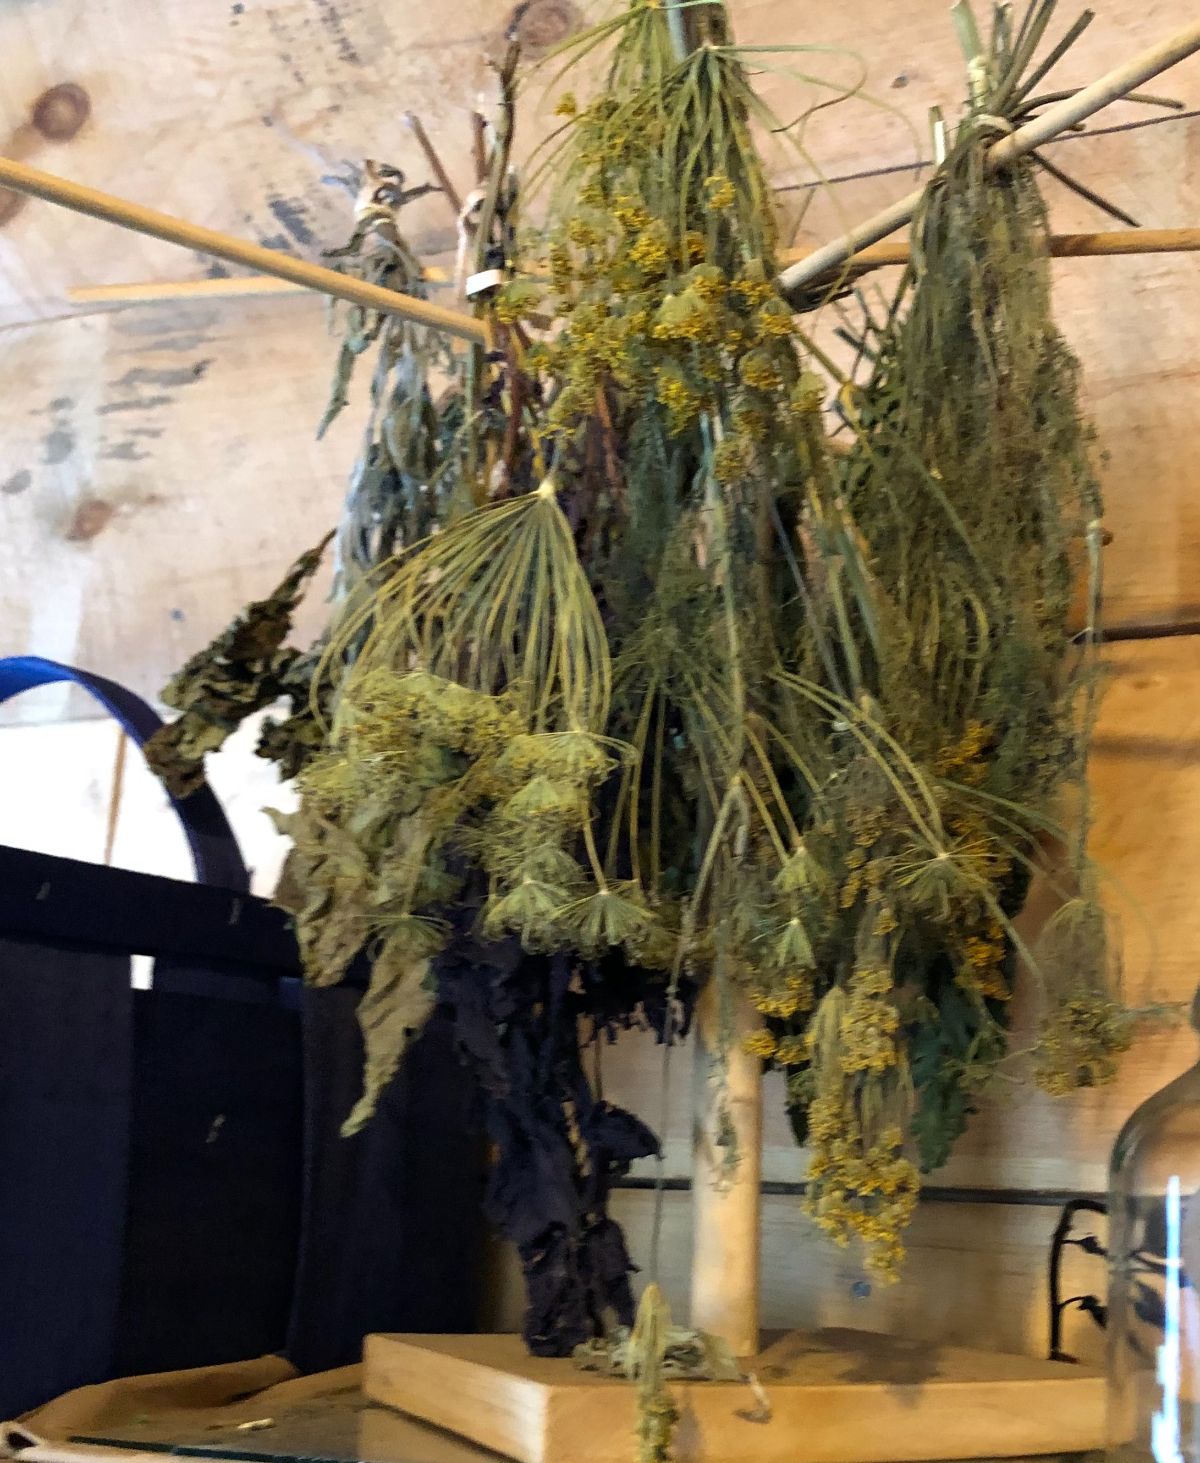 Bundles of herbs tied to a drying rack with up-cycled string